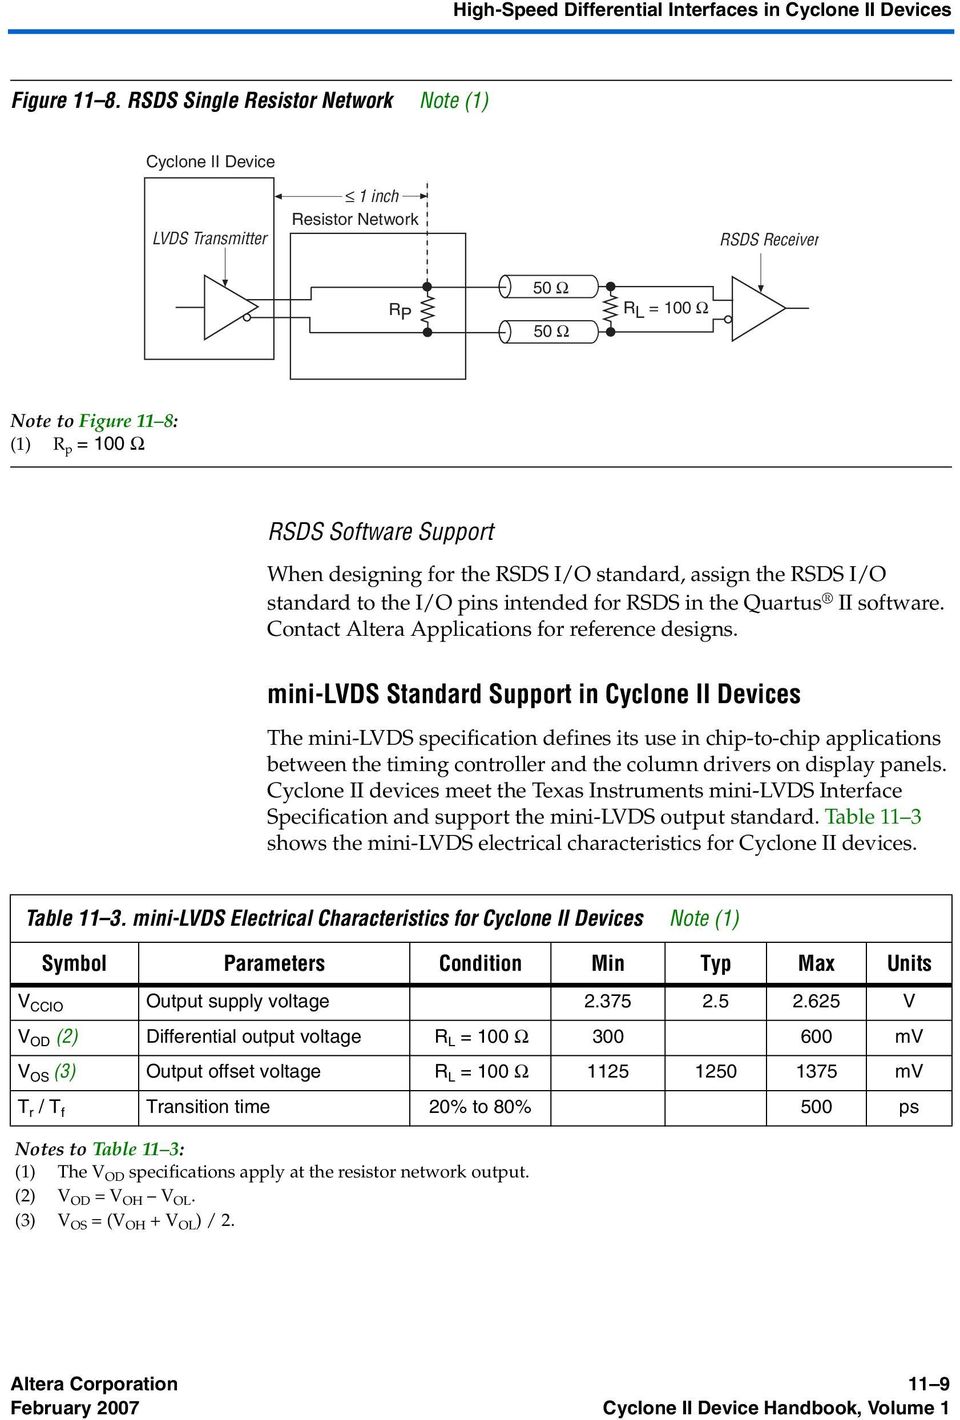 RSDS Software Support When designing for the RSDS I/O standard, assign the RSDS I/O standard to the I/O pins intended for RSDS in the Quartus II software.